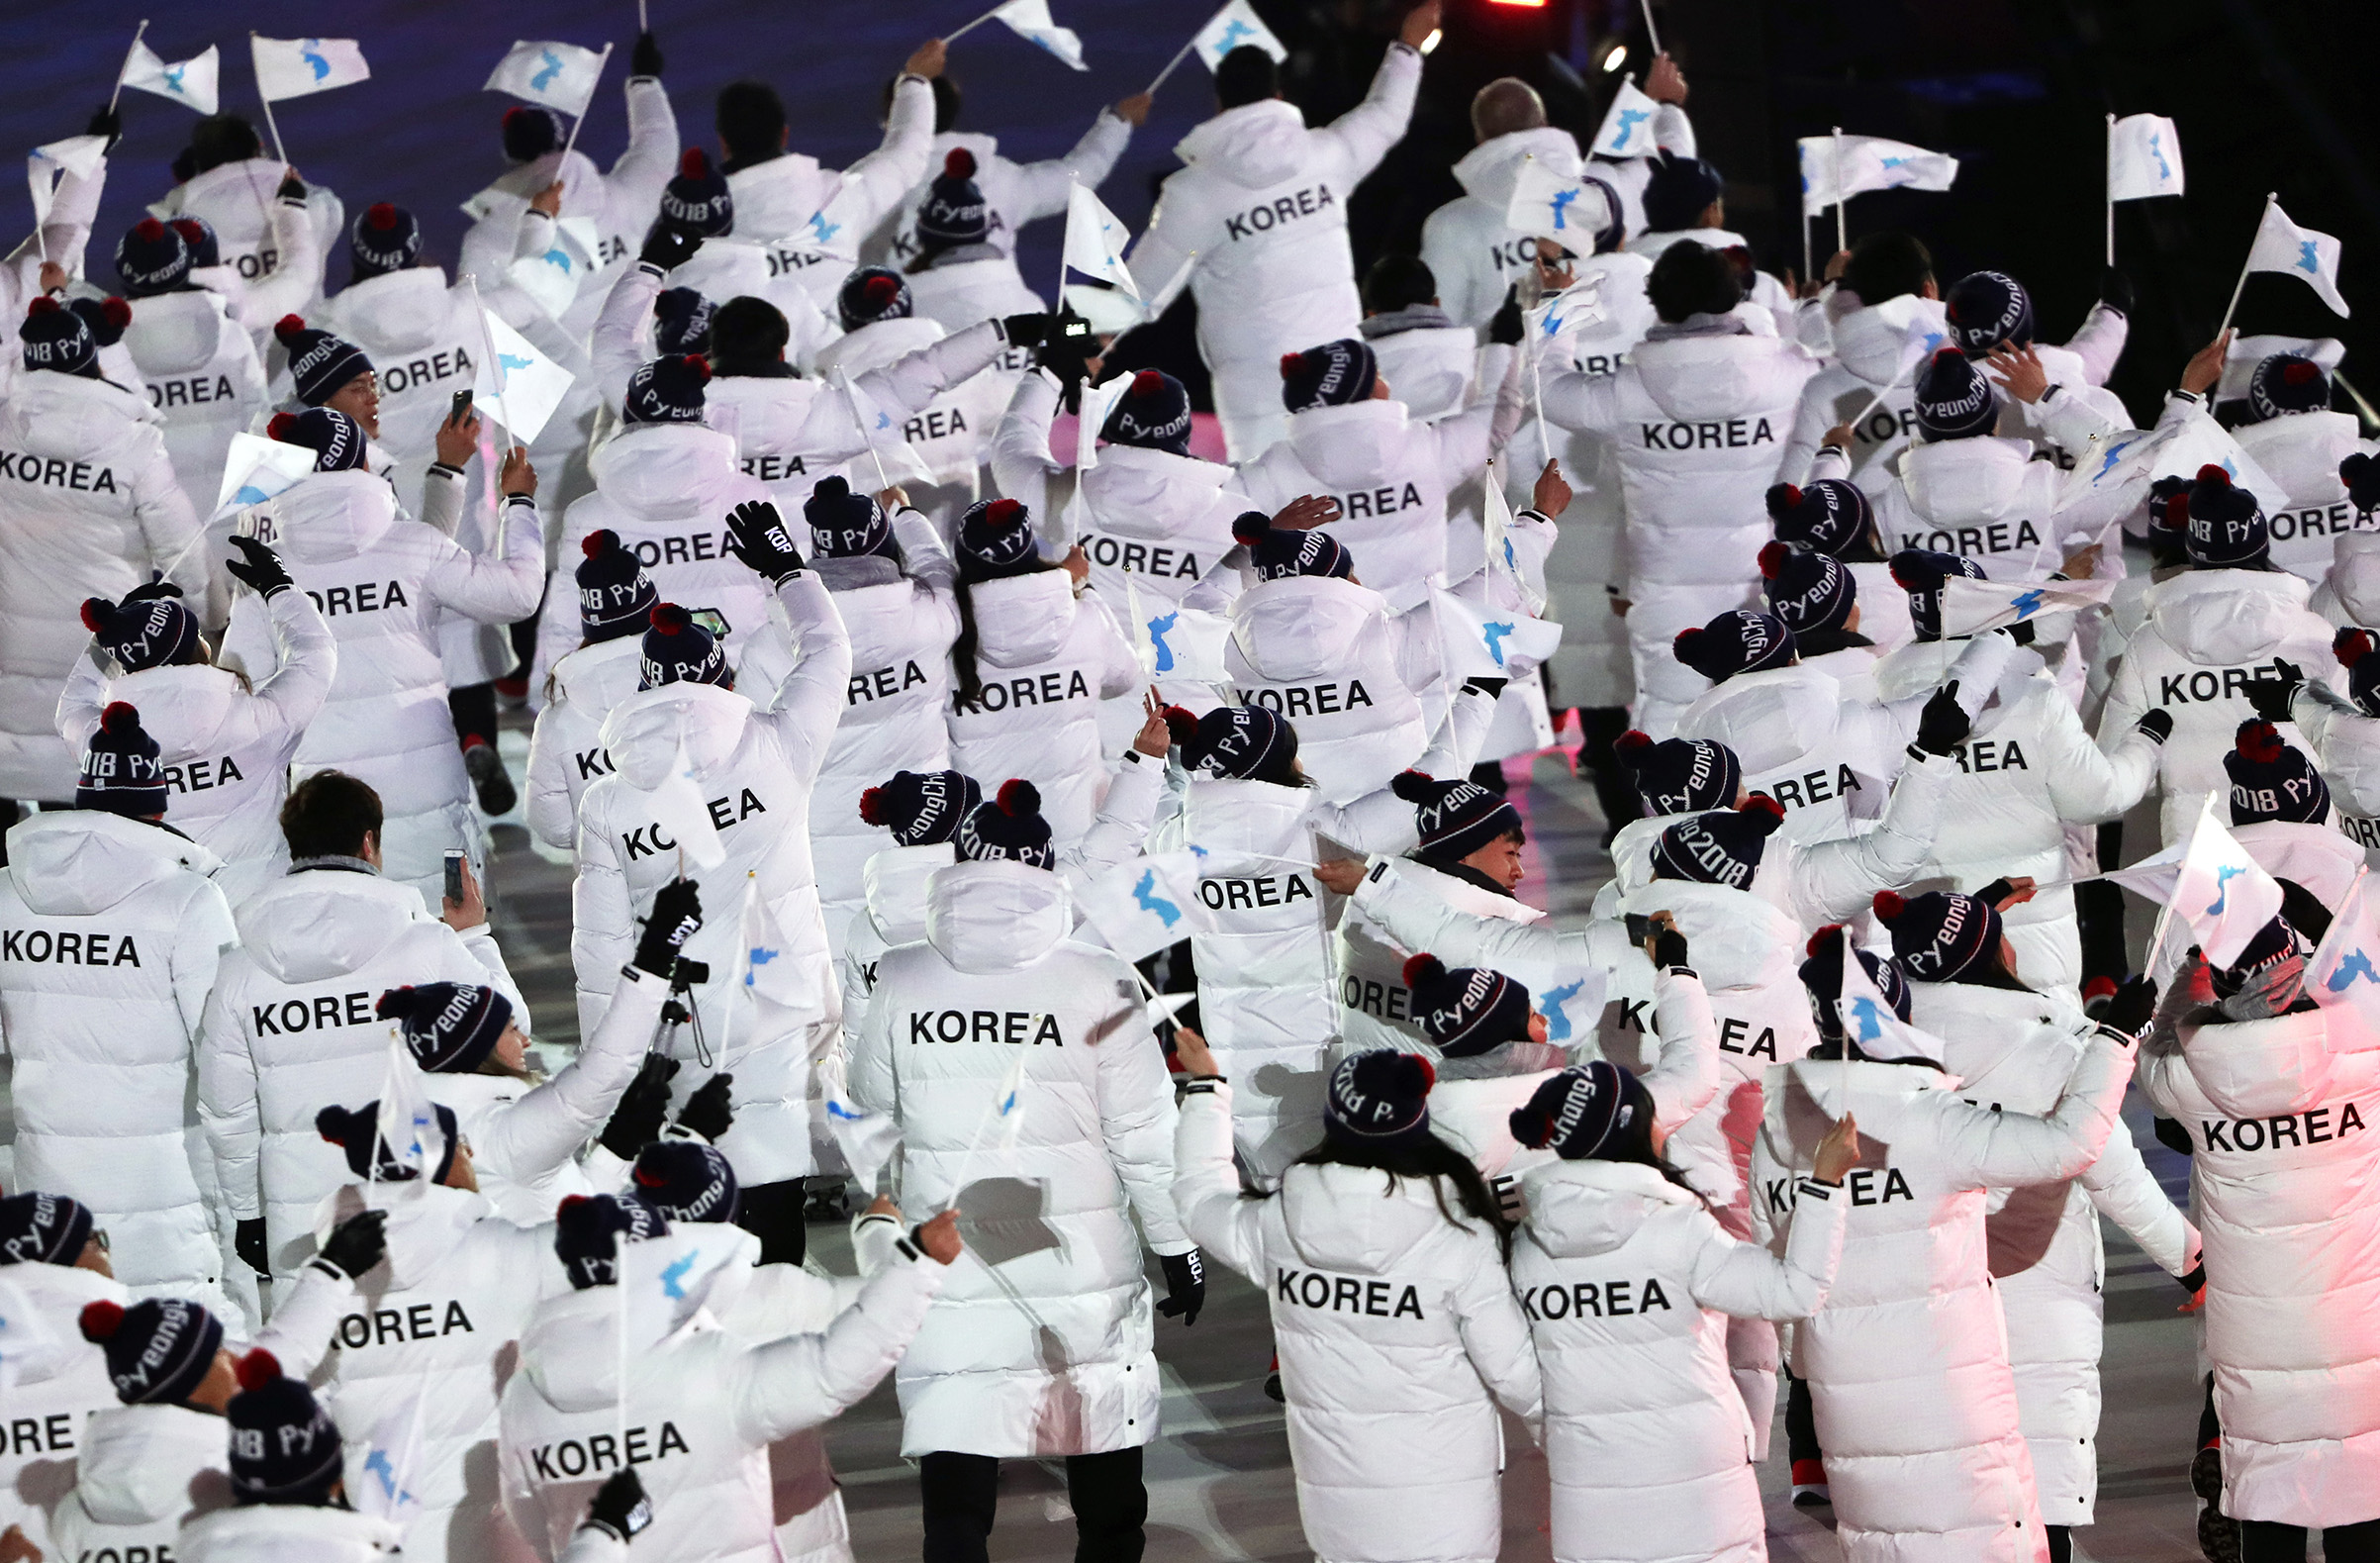 Delegations from North Korea and South Korea march under the Korean unification flag during the Parade of Nations at the opening ceremony of the PyeongChang 2018 Winter Olympic Games.